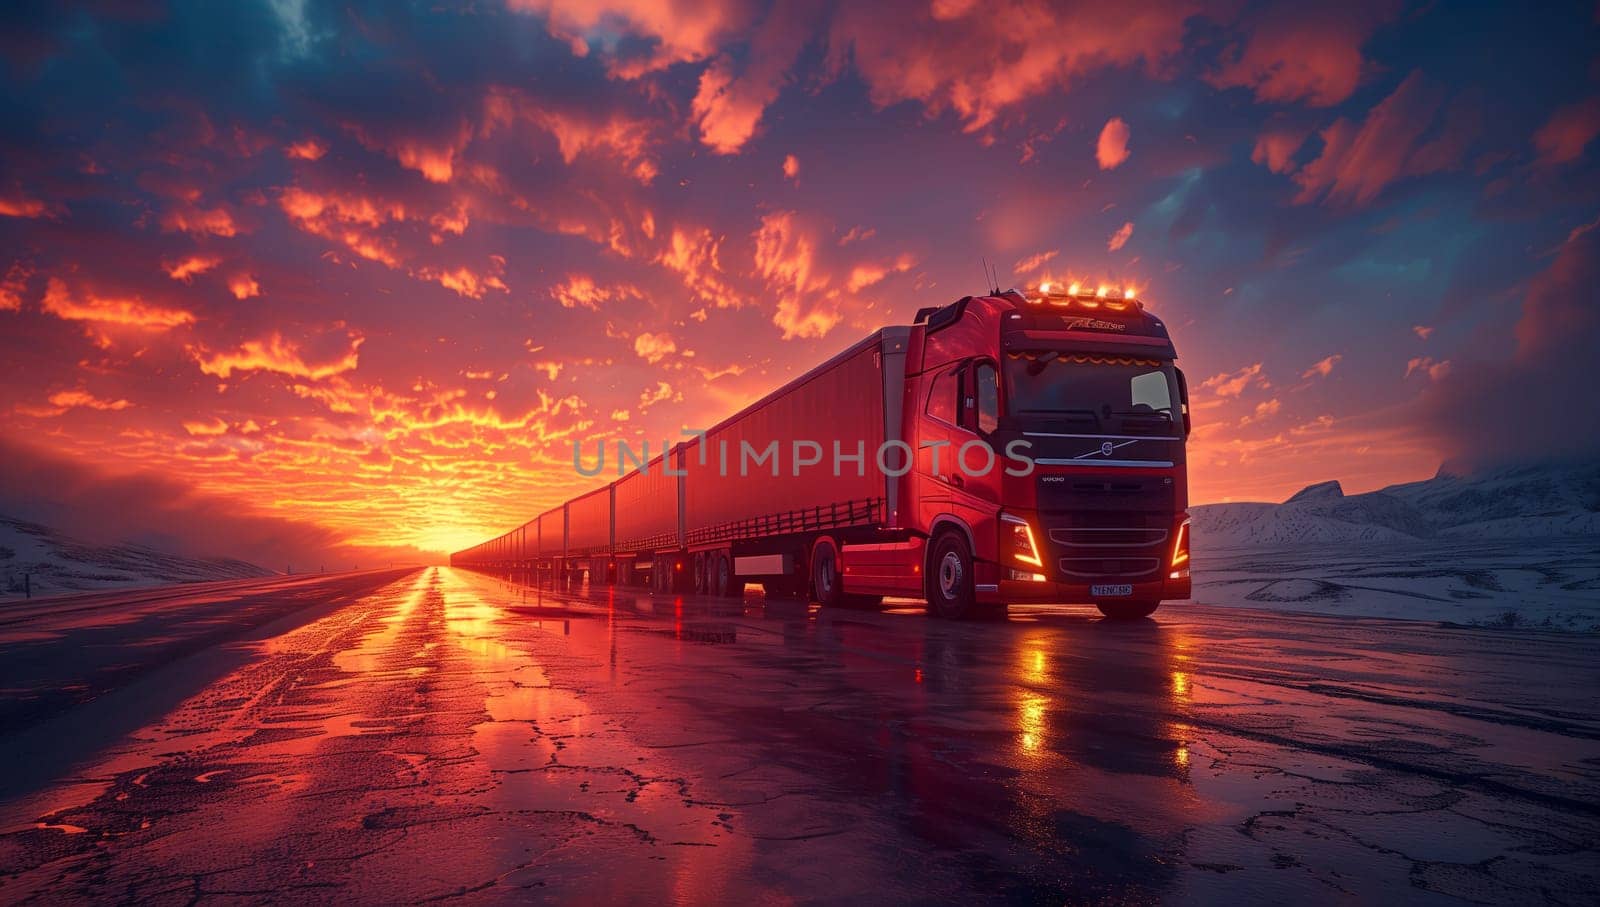 A red semi truck rolls down a wet road under a sunset sky by richwolf